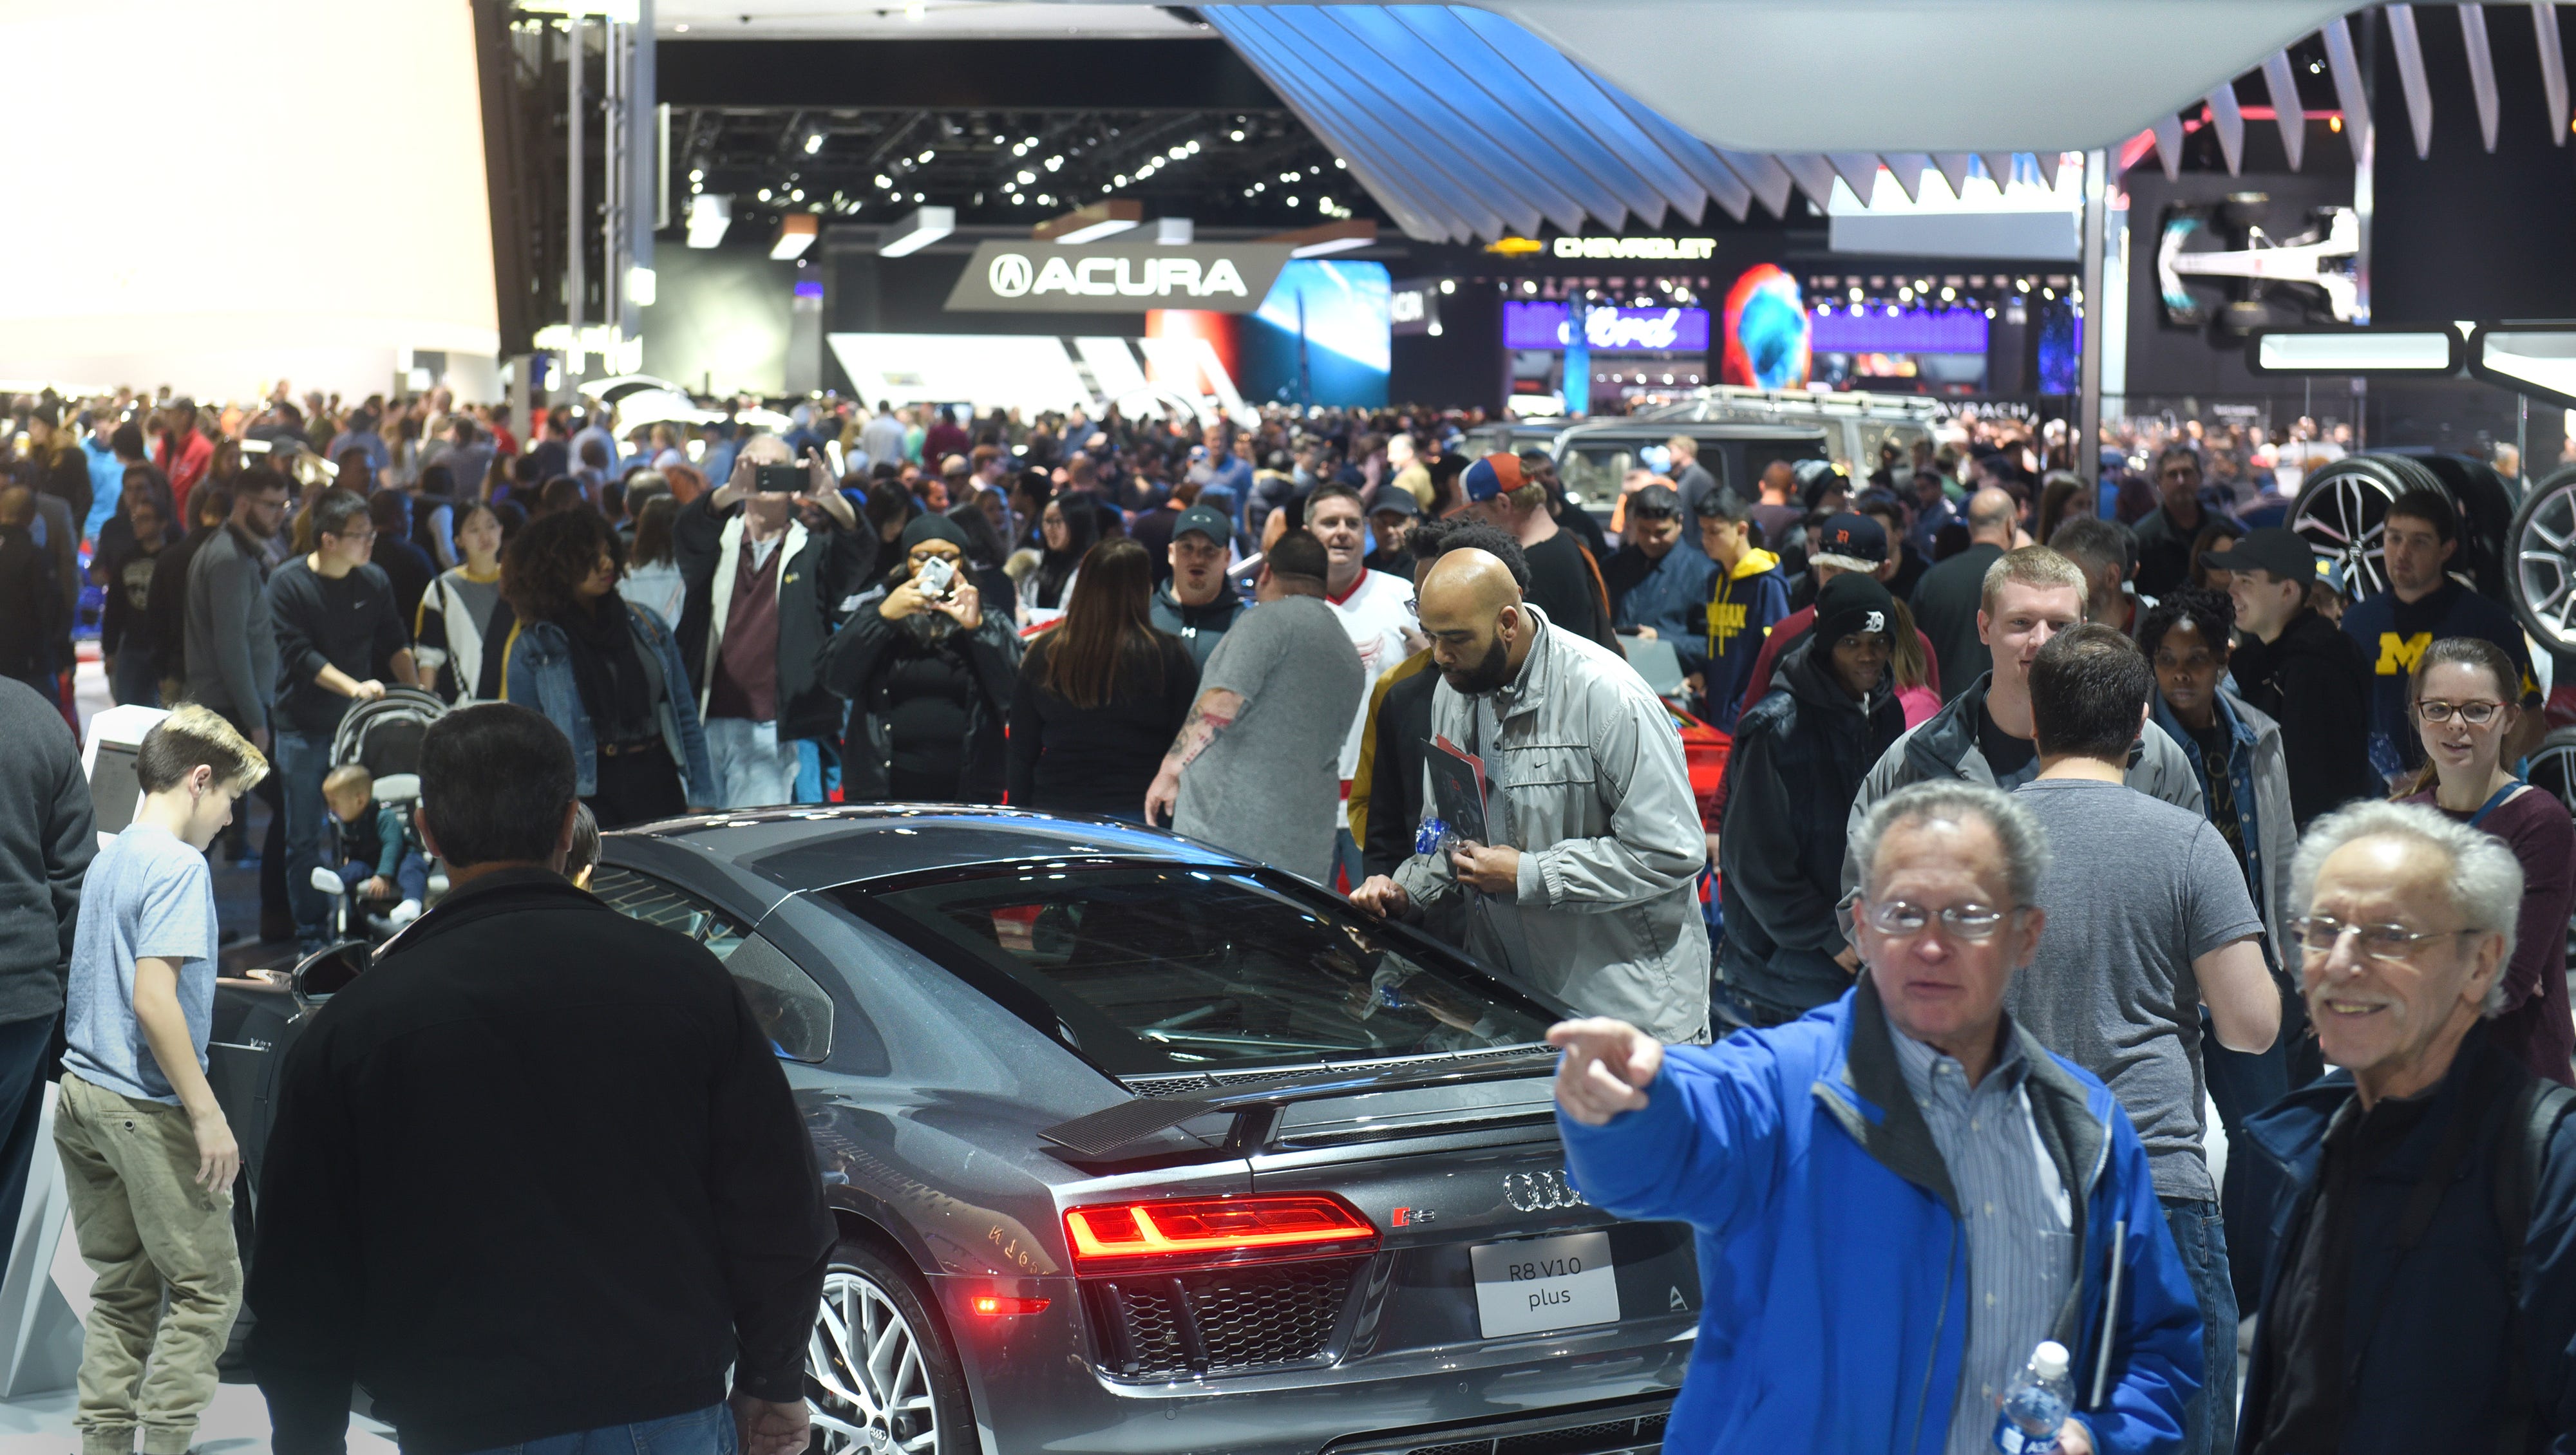 Thousands of people fill Cobo Center on Saturday January 20, 2018 at the Audi  display for the first public day for the North American International Auto Show